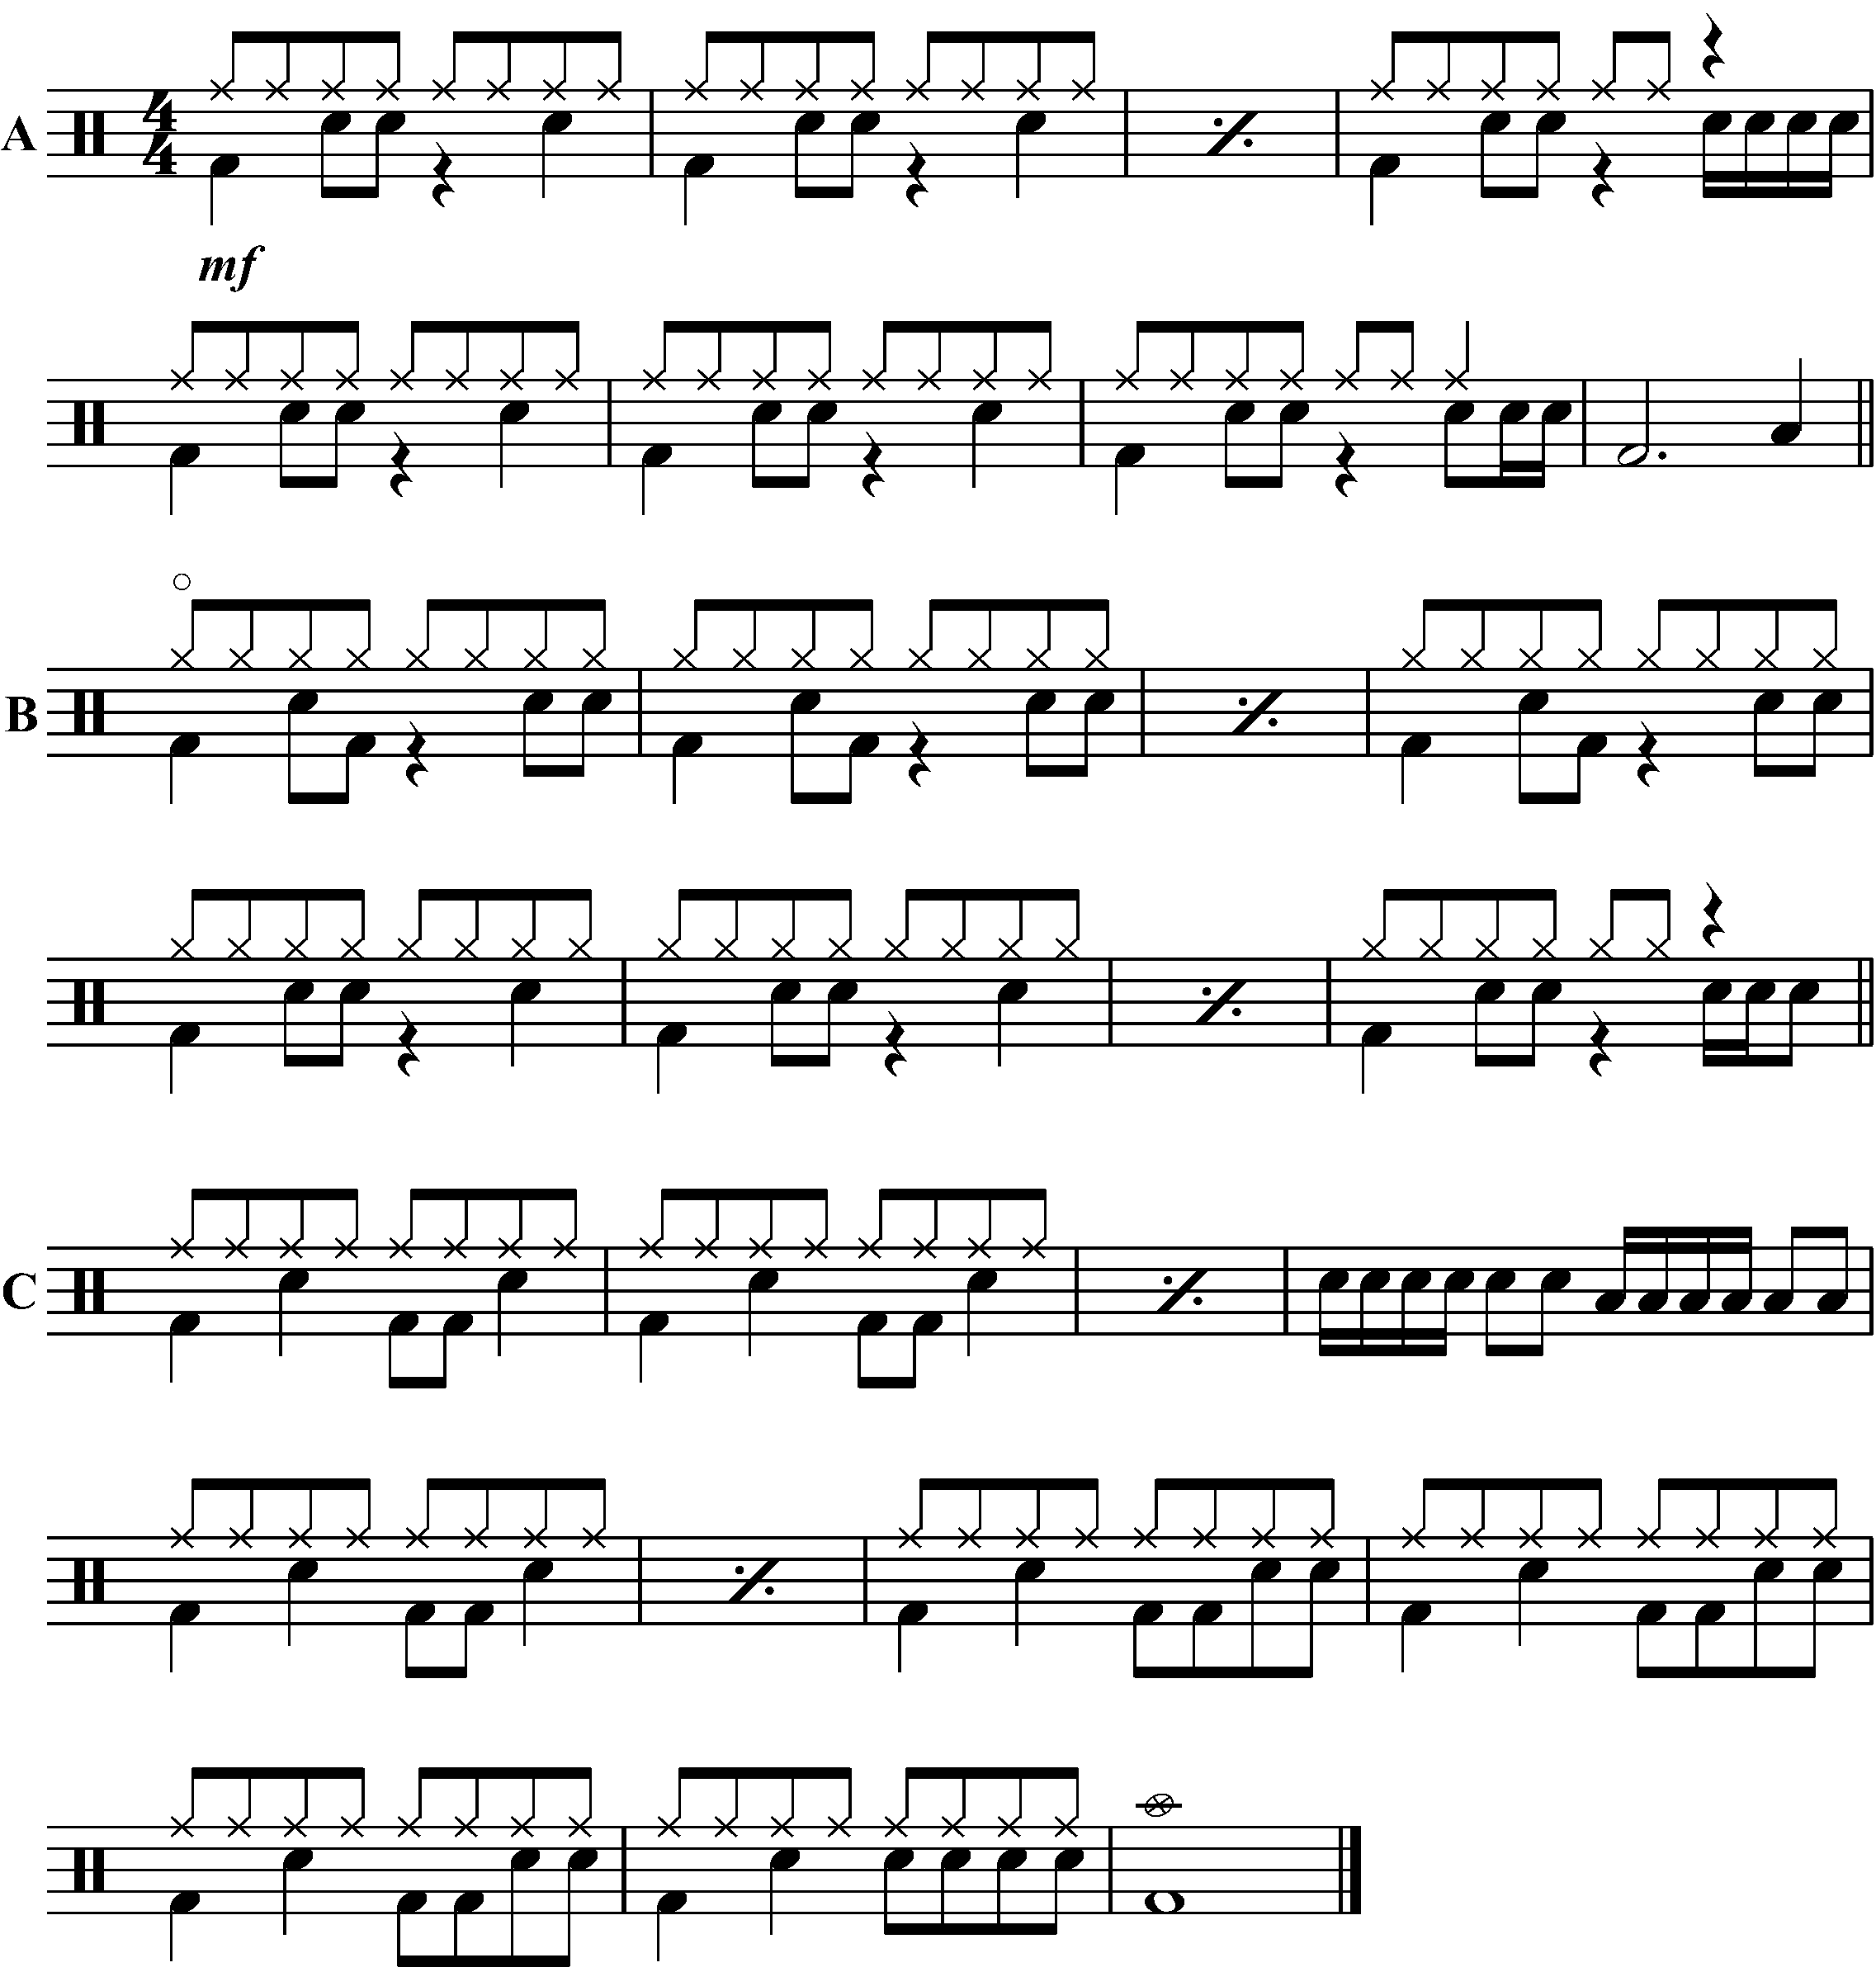 A short piece focusing on applying this groove.